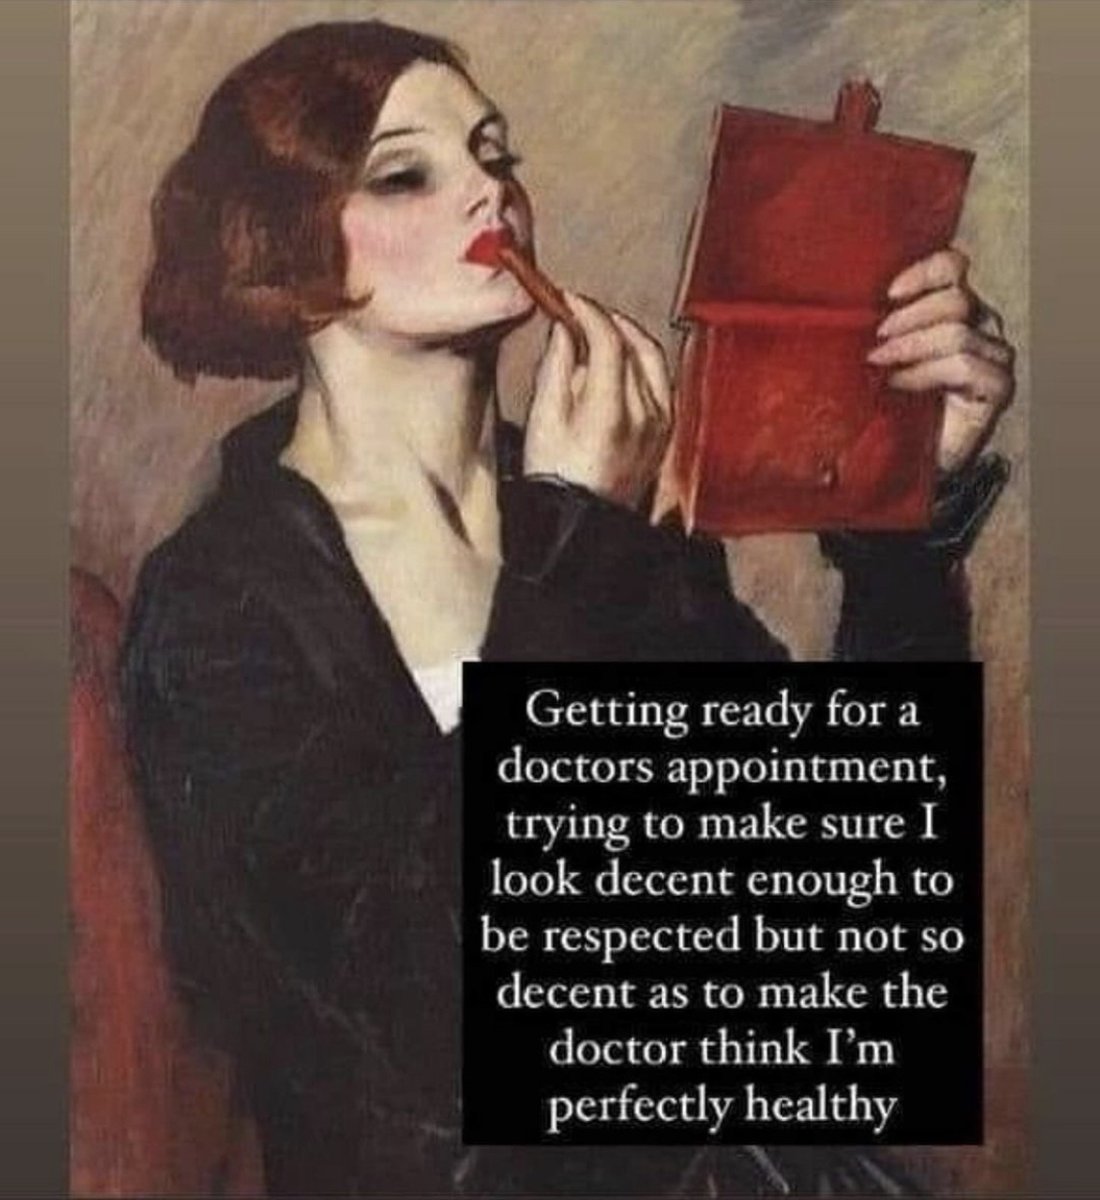 Made me laugh as it's totally accurate!! 😁 #chronicpain #autominnunedisease #invisibleillness #lupusfighter #LupusSucks #chronicillness #LupusLife #lupuswarrior #lupus #lupustrust #lupusawareness #lupustruth #lupusfacts #doctorsappointment